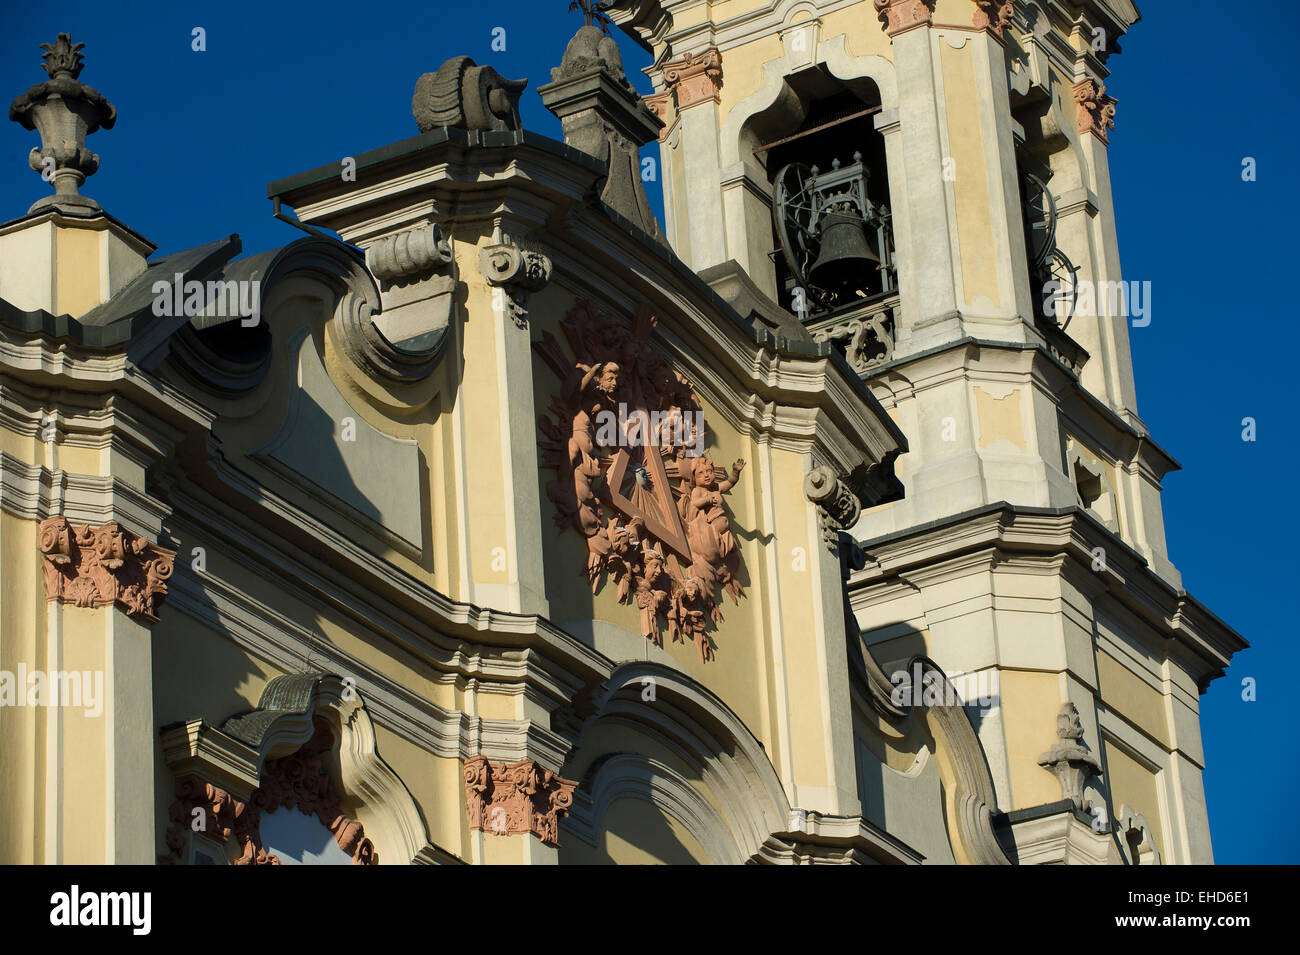 Italy, Crema, the Holy Trinity church, street XX Settembre in Baroque style, the bell tower of the Redeemer statue. Stock Photo